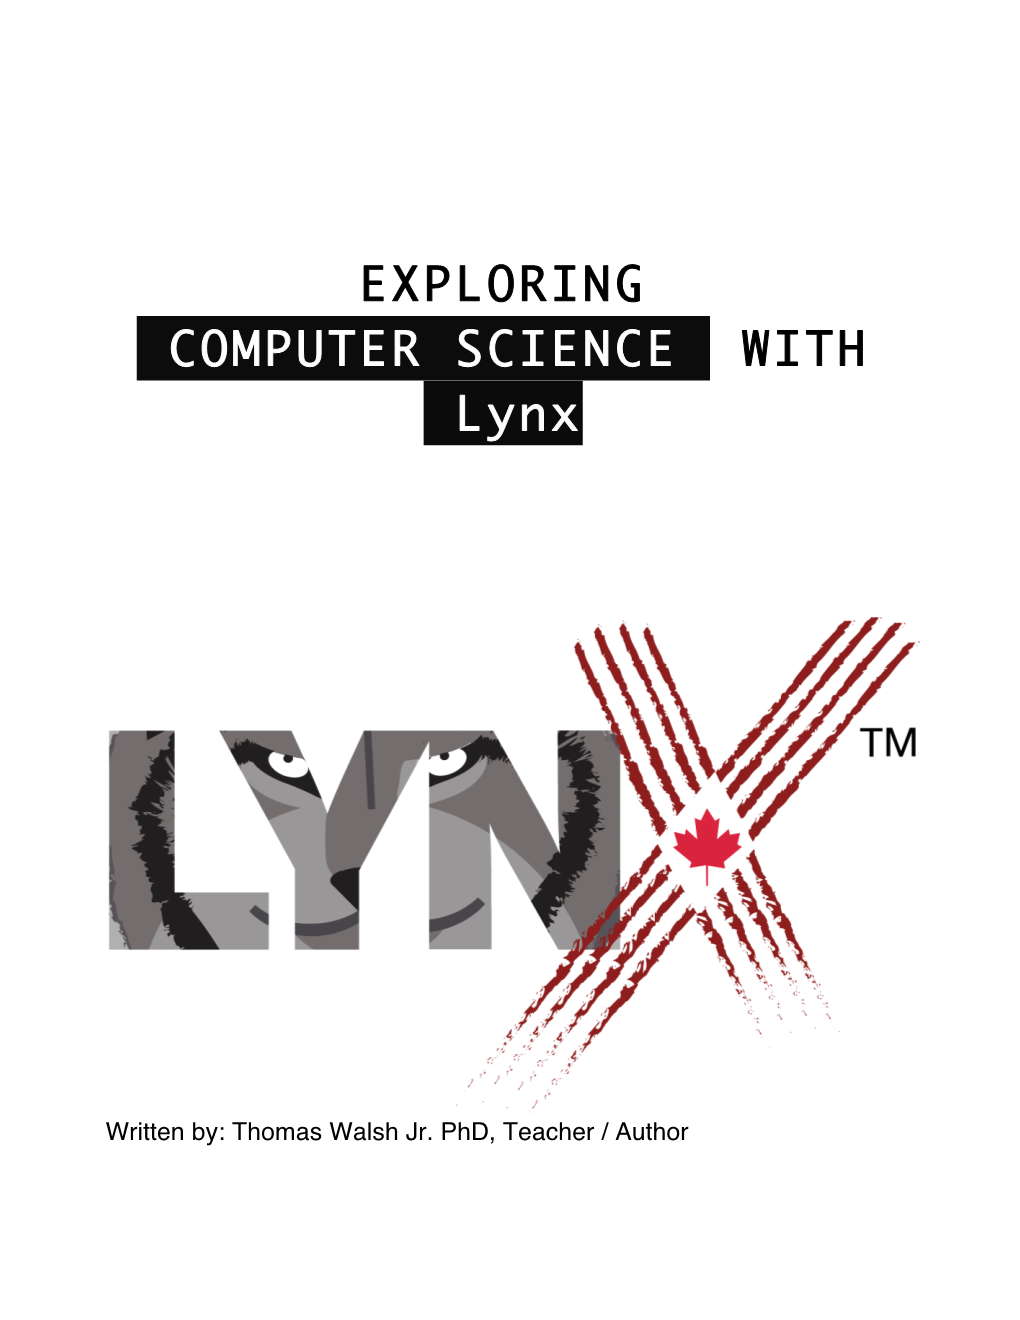 EXPLORING COMPUTER SCIENCE with Lynx